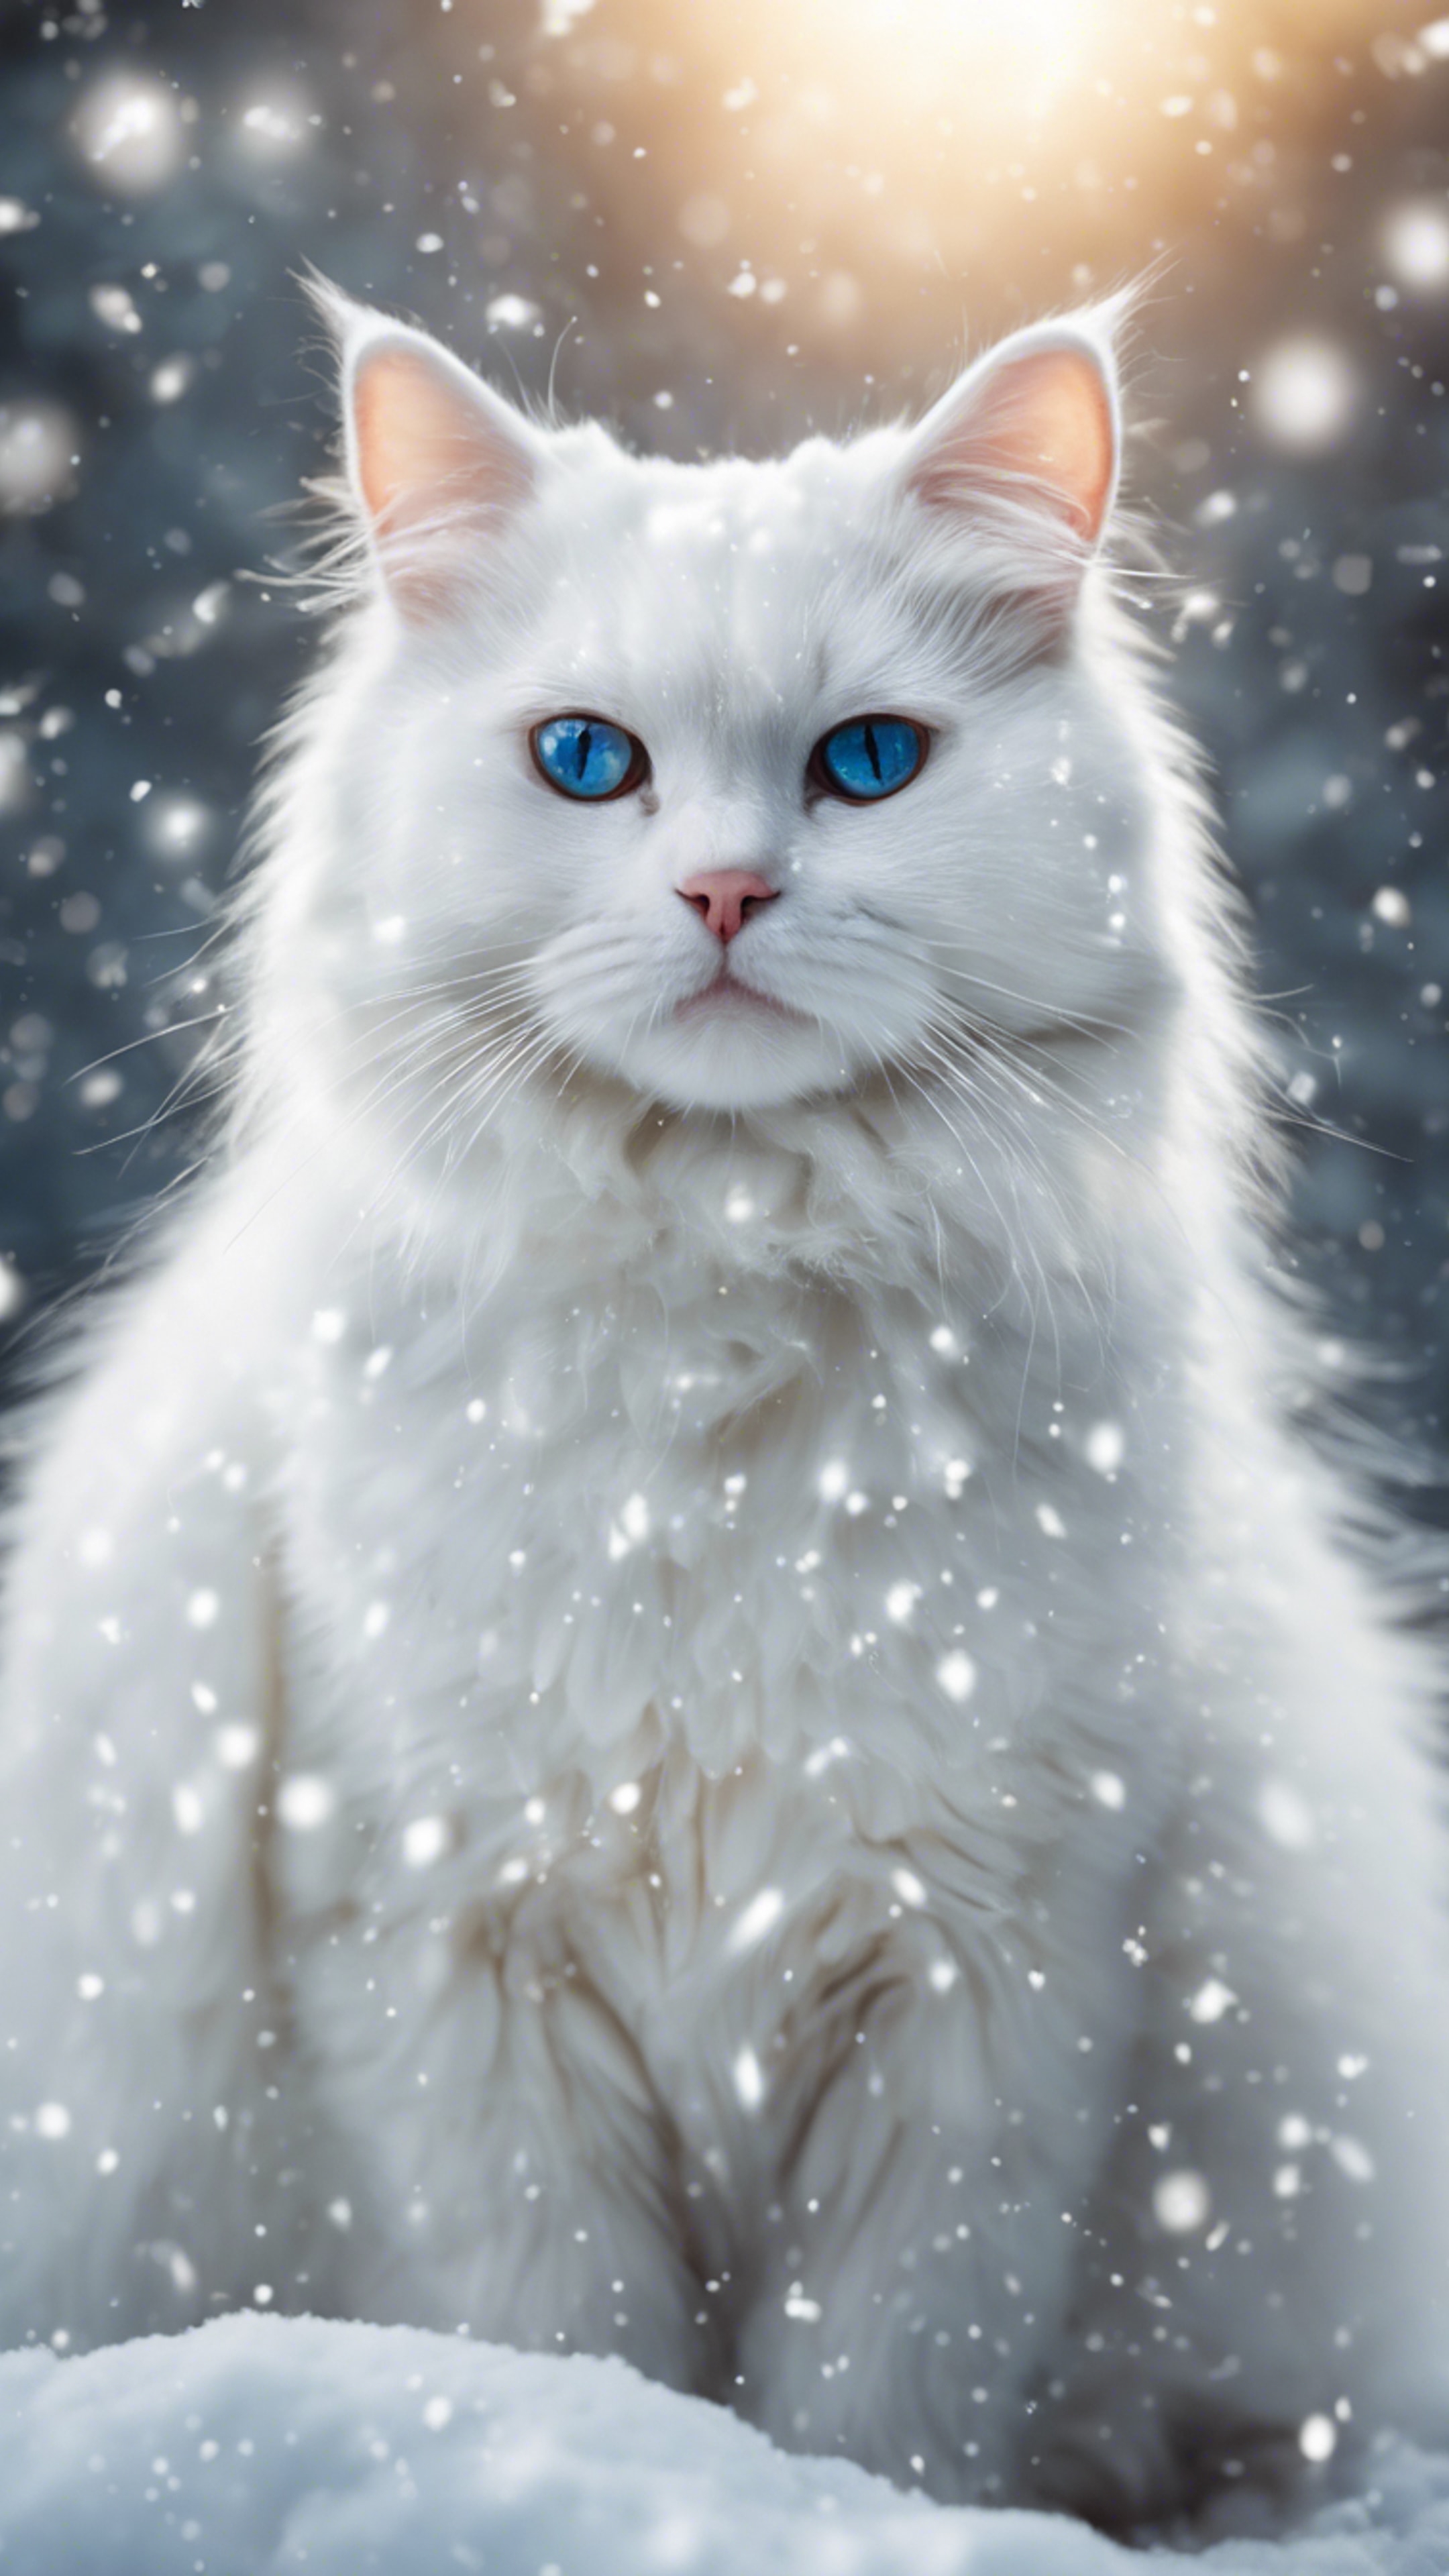 A fluffy white cat in the winter, amidst falling snowflakes.壁紙[a246cb8c0cd2485b96c3]